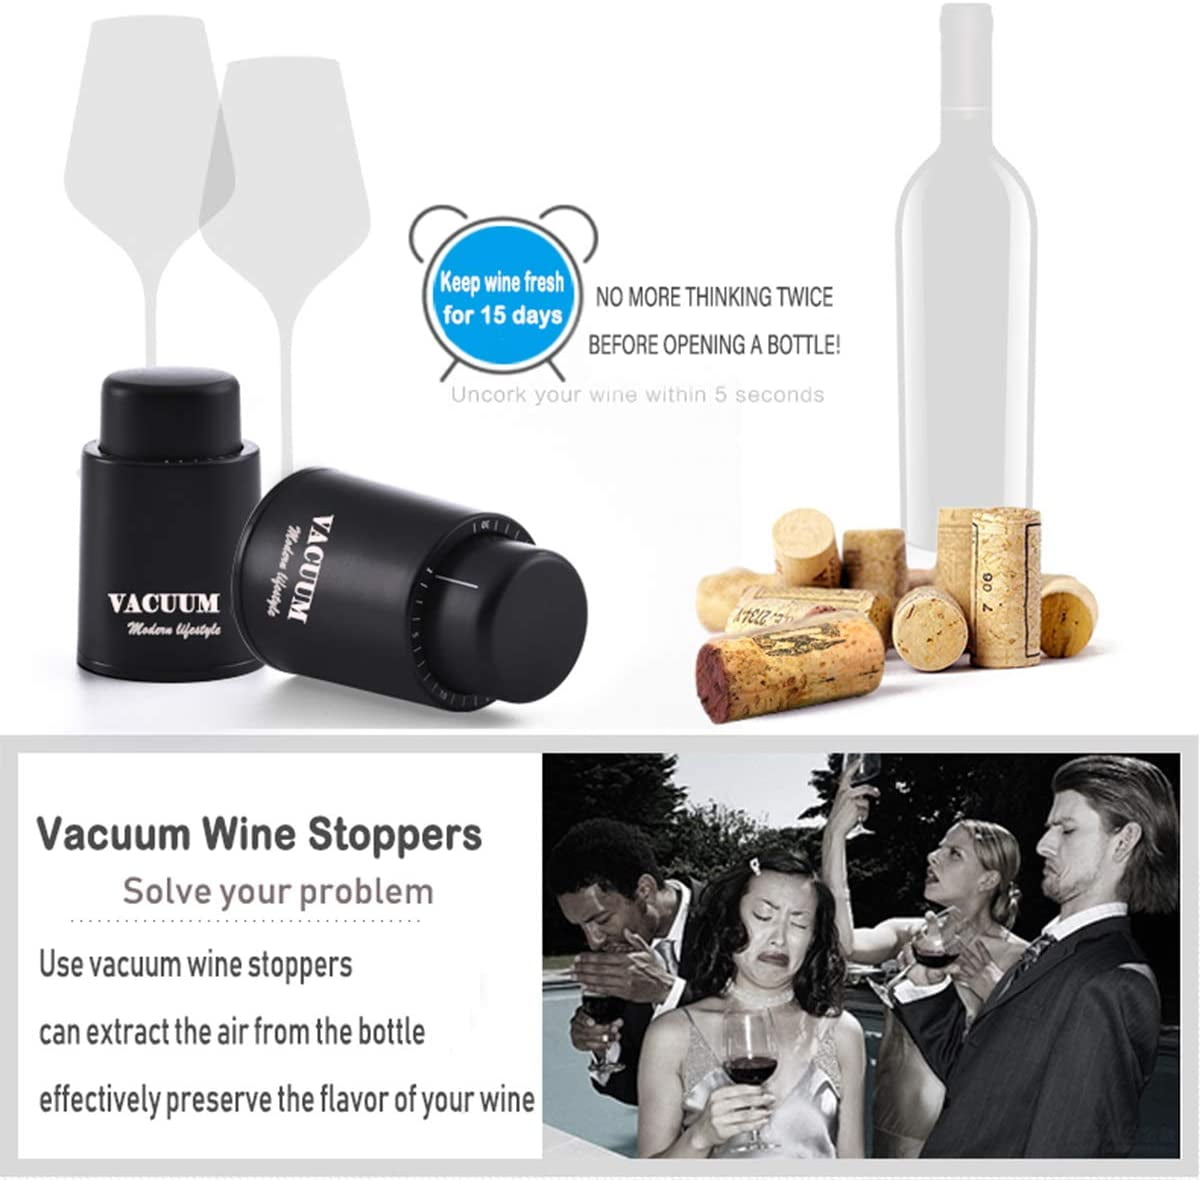 Fortuna Mille Wine Bottle Stoppers Great Present for Wine Lovers Wine Gift Wine Corks Keep Fresh with Time Scale Record Real Vacuum Wine Stoppers Black 2 Pack Reusable Wine Preserver